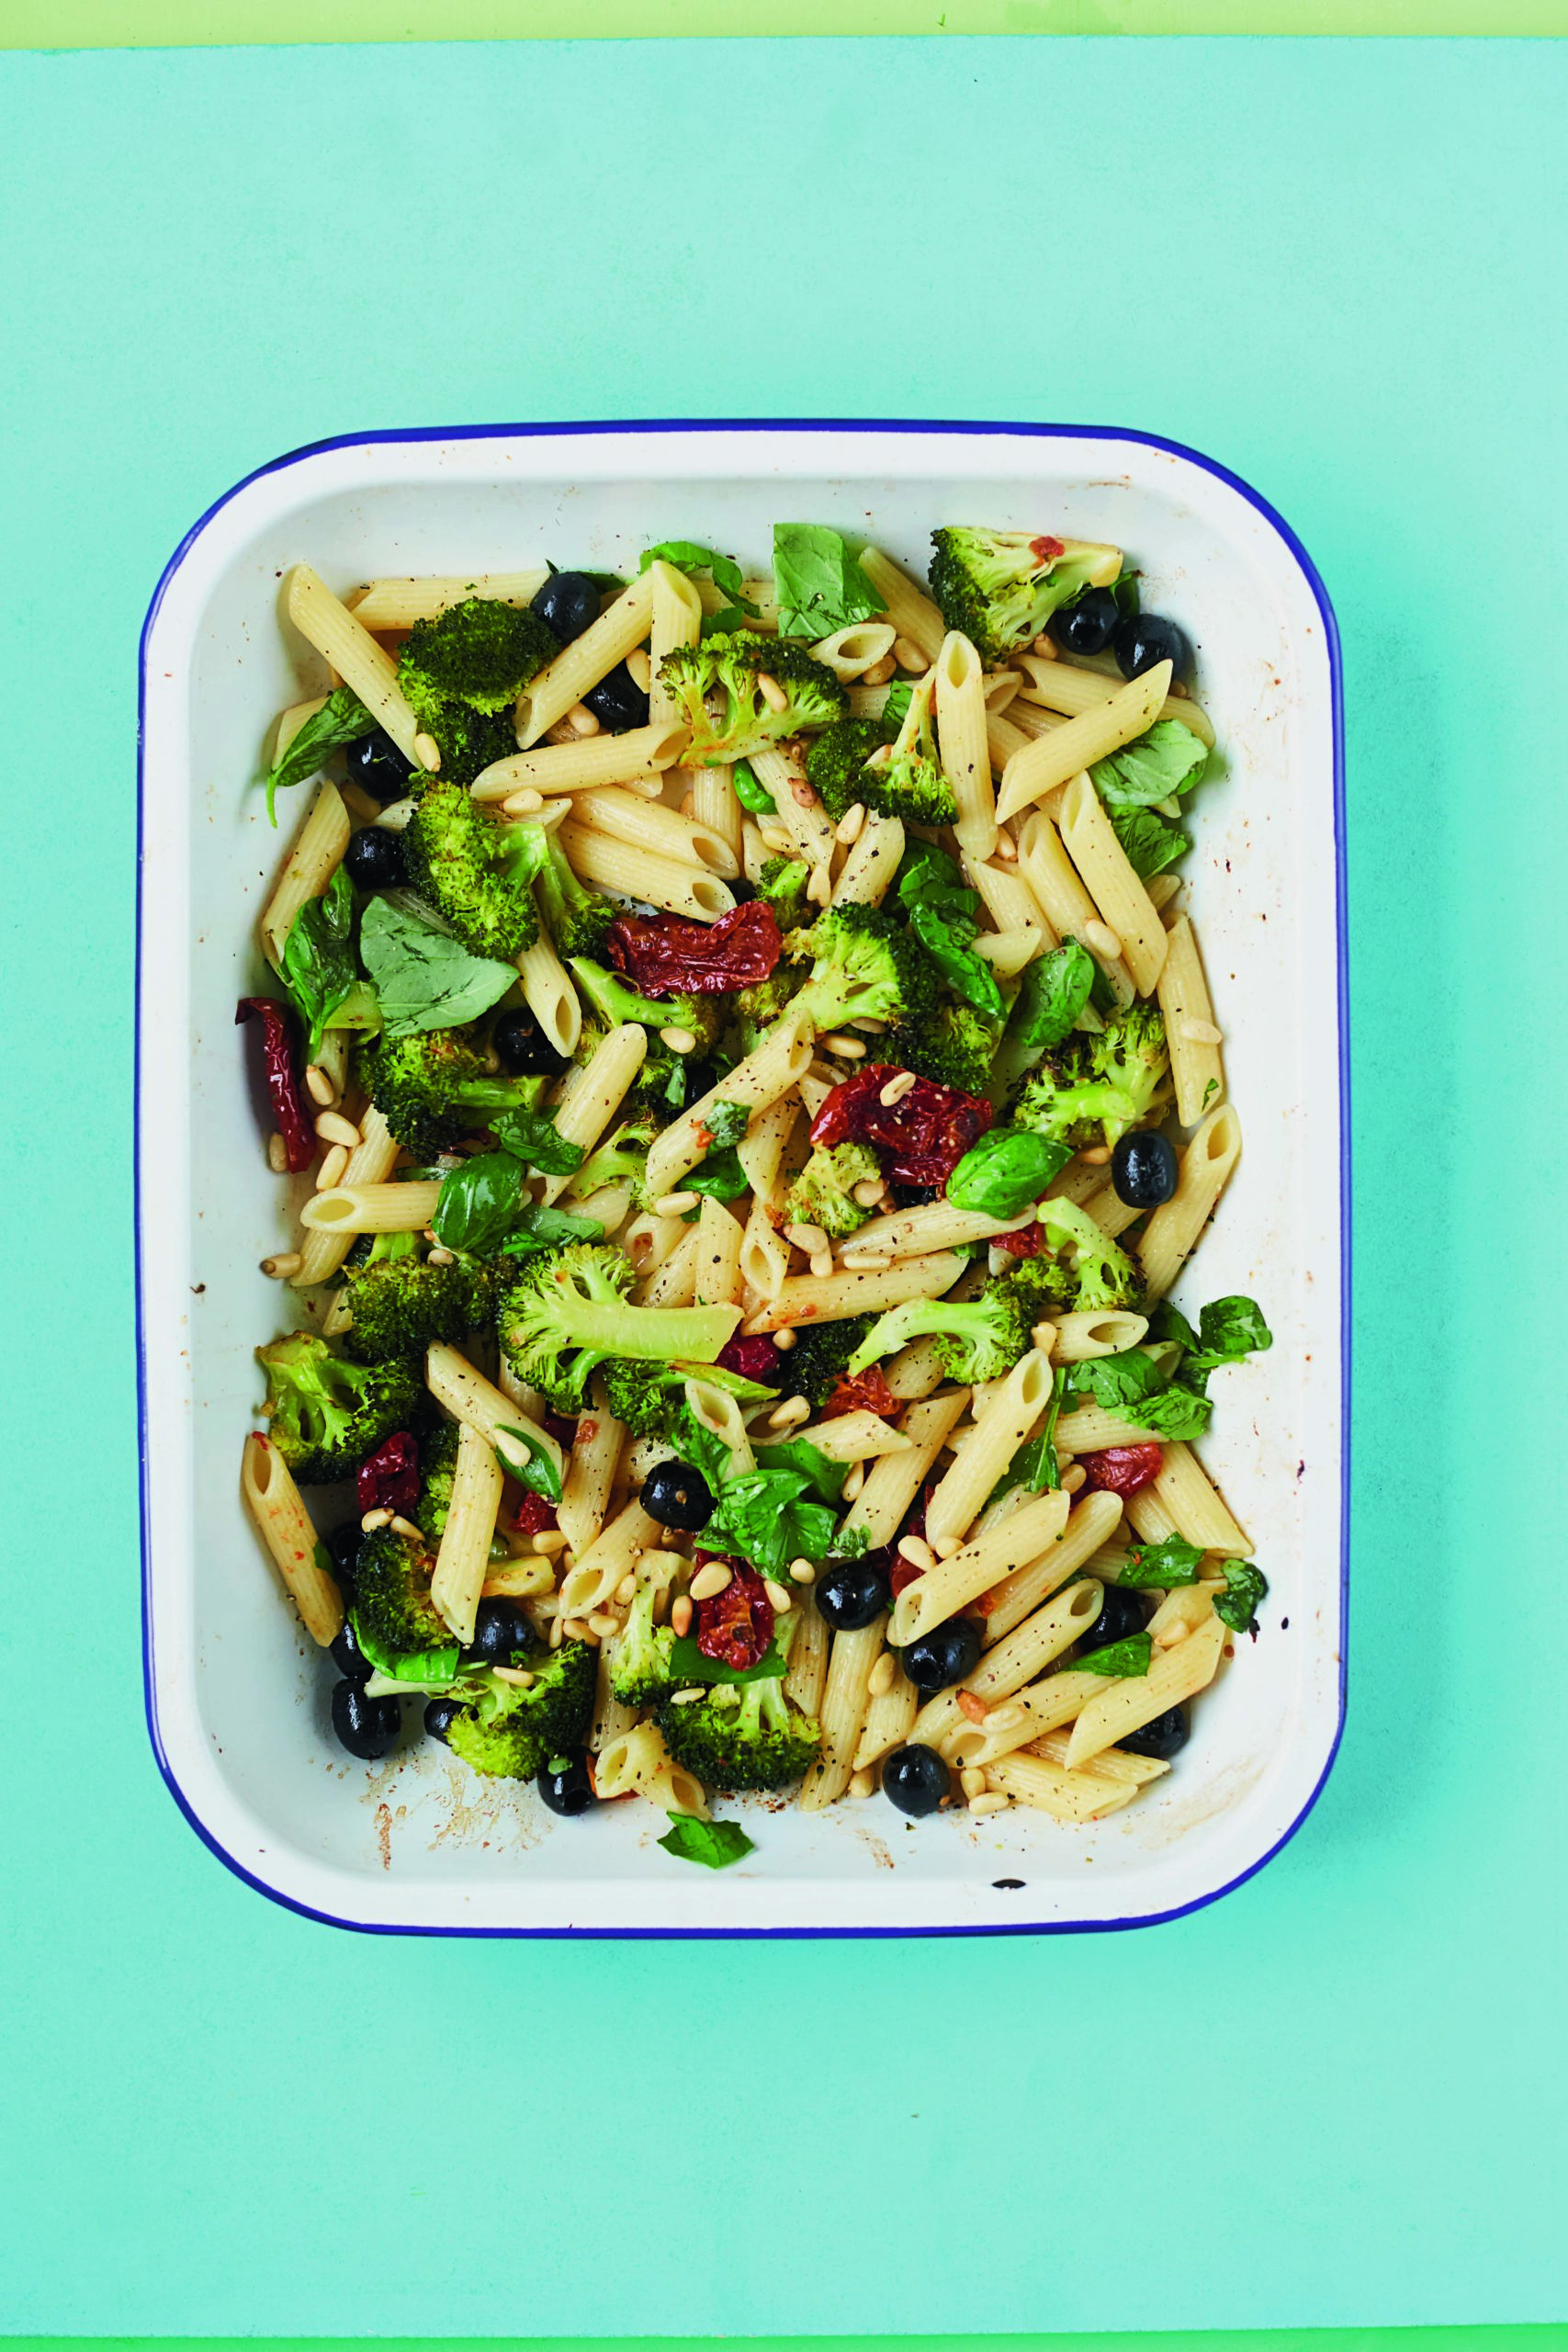 Lunchbox Pasta Salad: Quick-Roast Broccoli With Olives, Sunblush Tomatoes, Basil and Pine Nuts